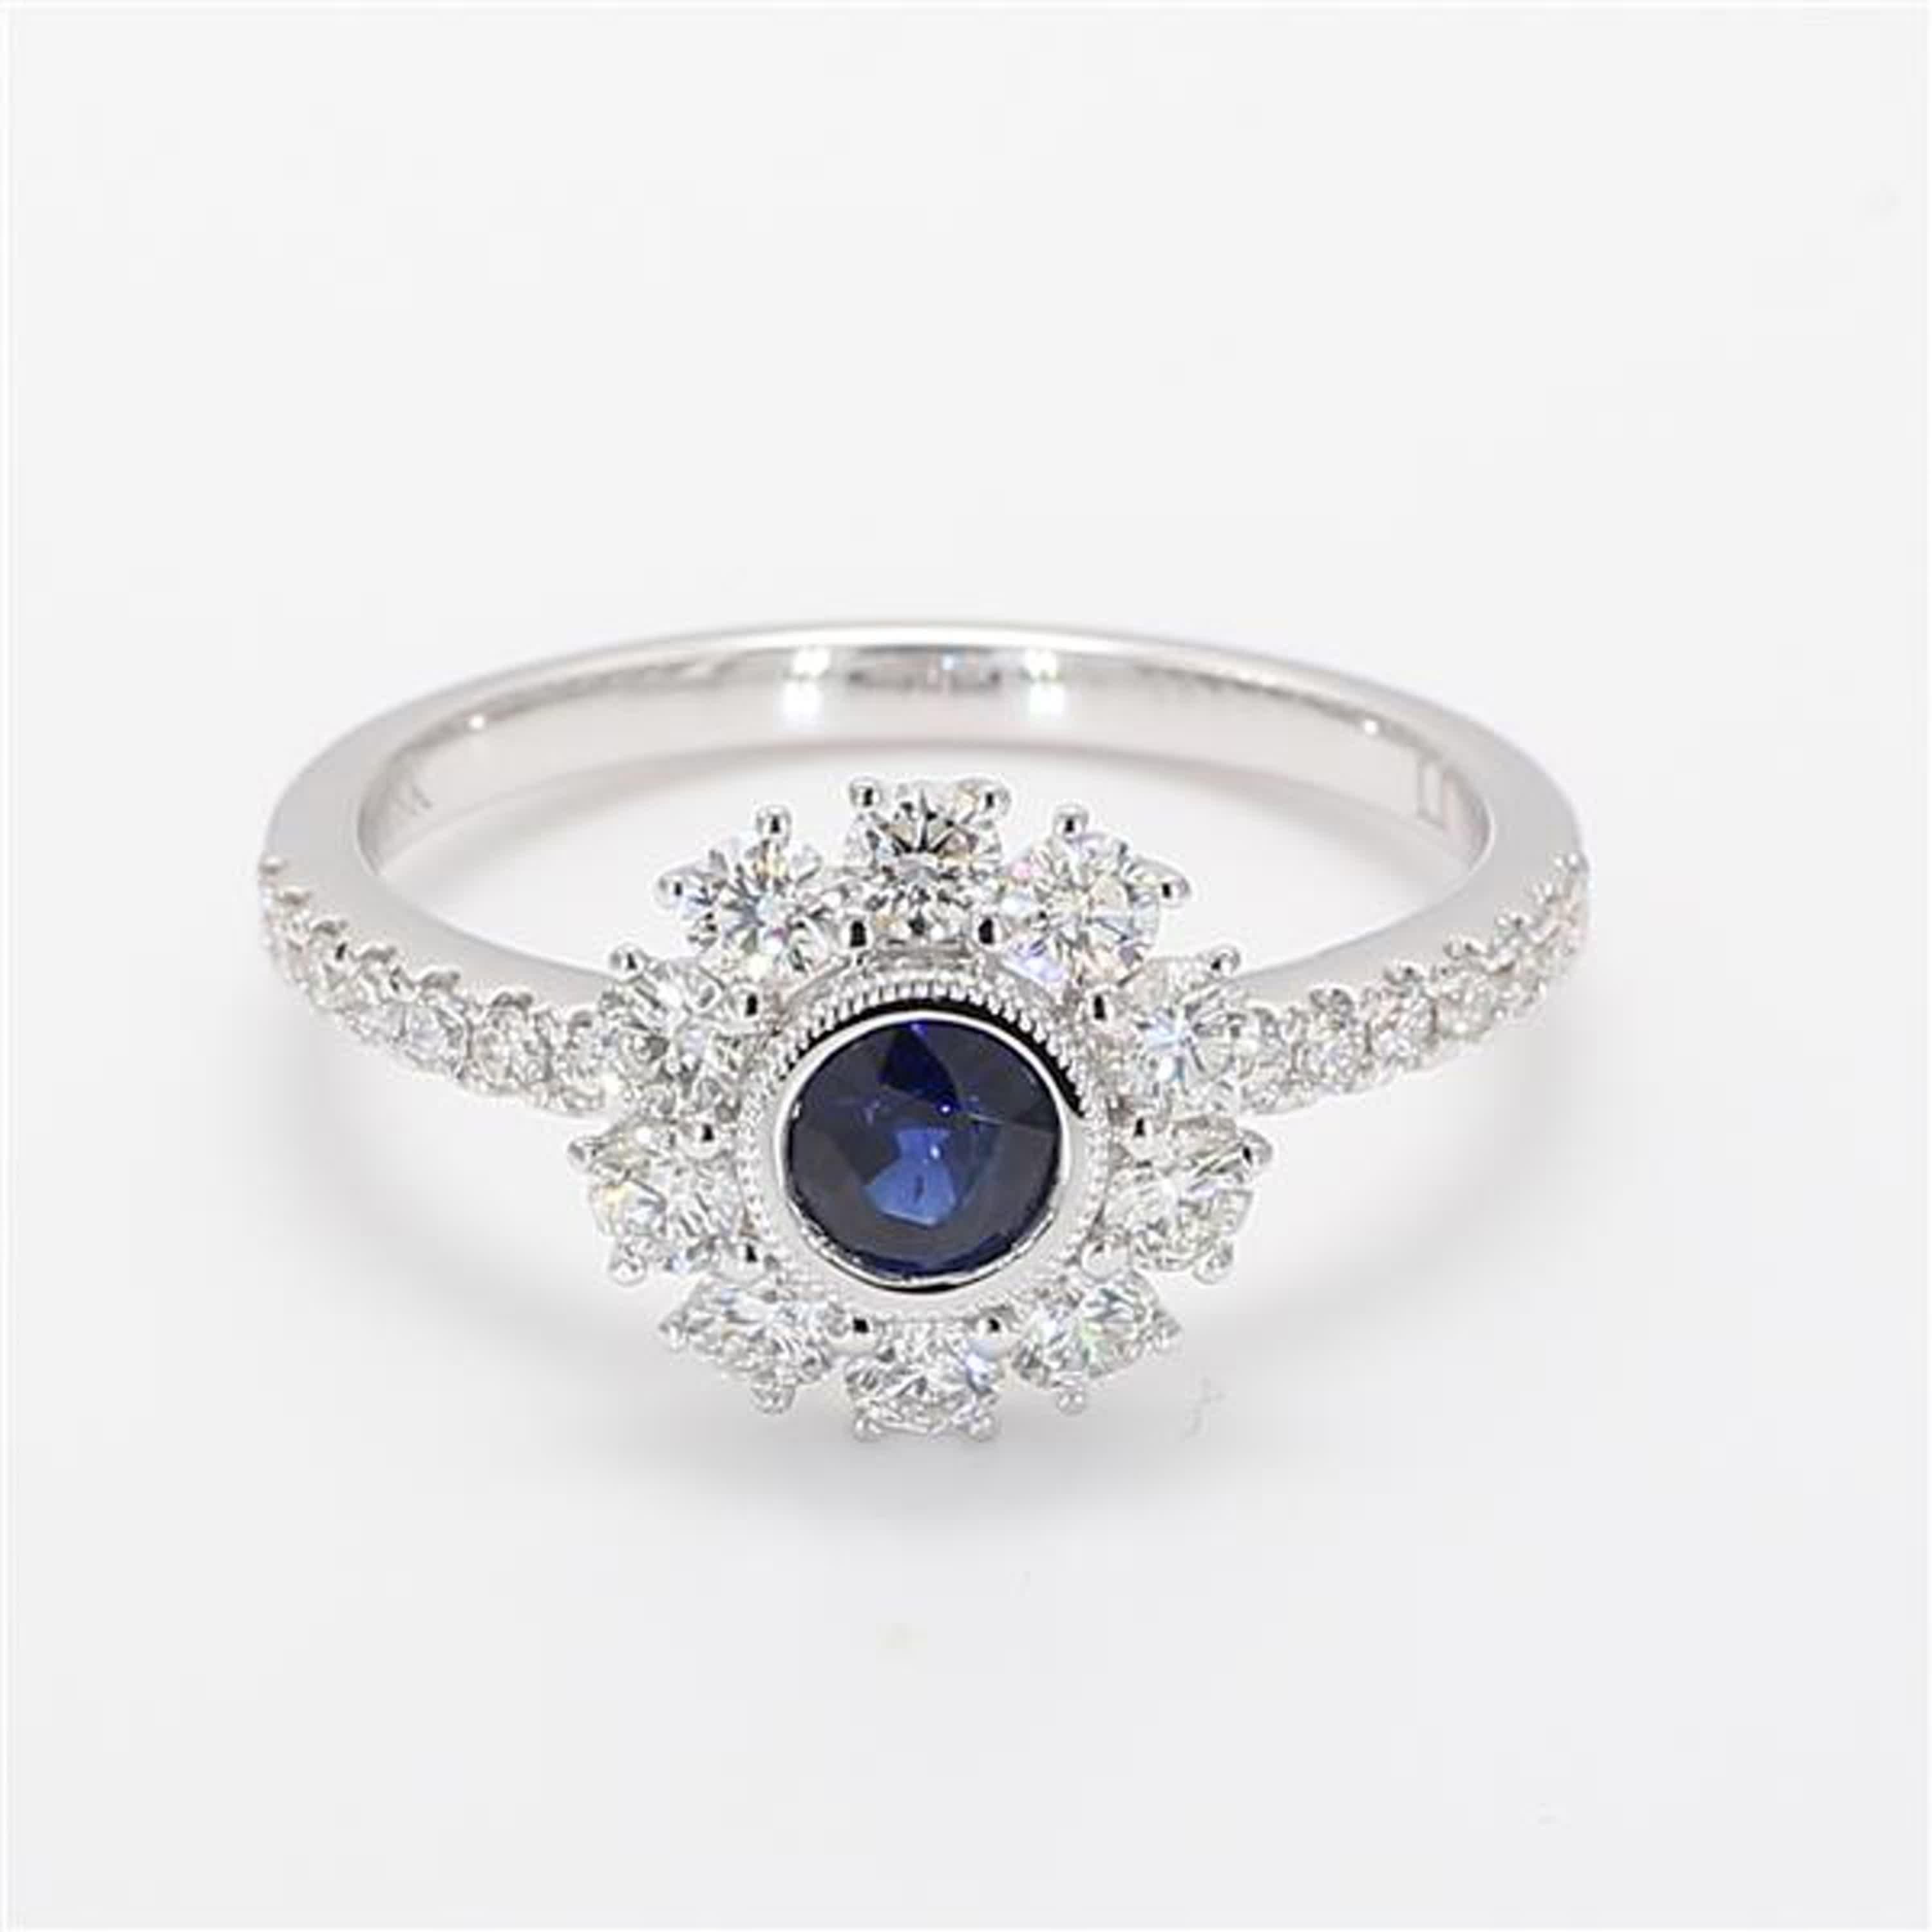 RareGemWorld's classic sapphire ring. Mounted in a beautiful 18K White Gold setting with a natural round cut blue sapphire. The sapphire is surrounded by natural round white diamond melee. This ring is guaranteed to impress and enhance your personal